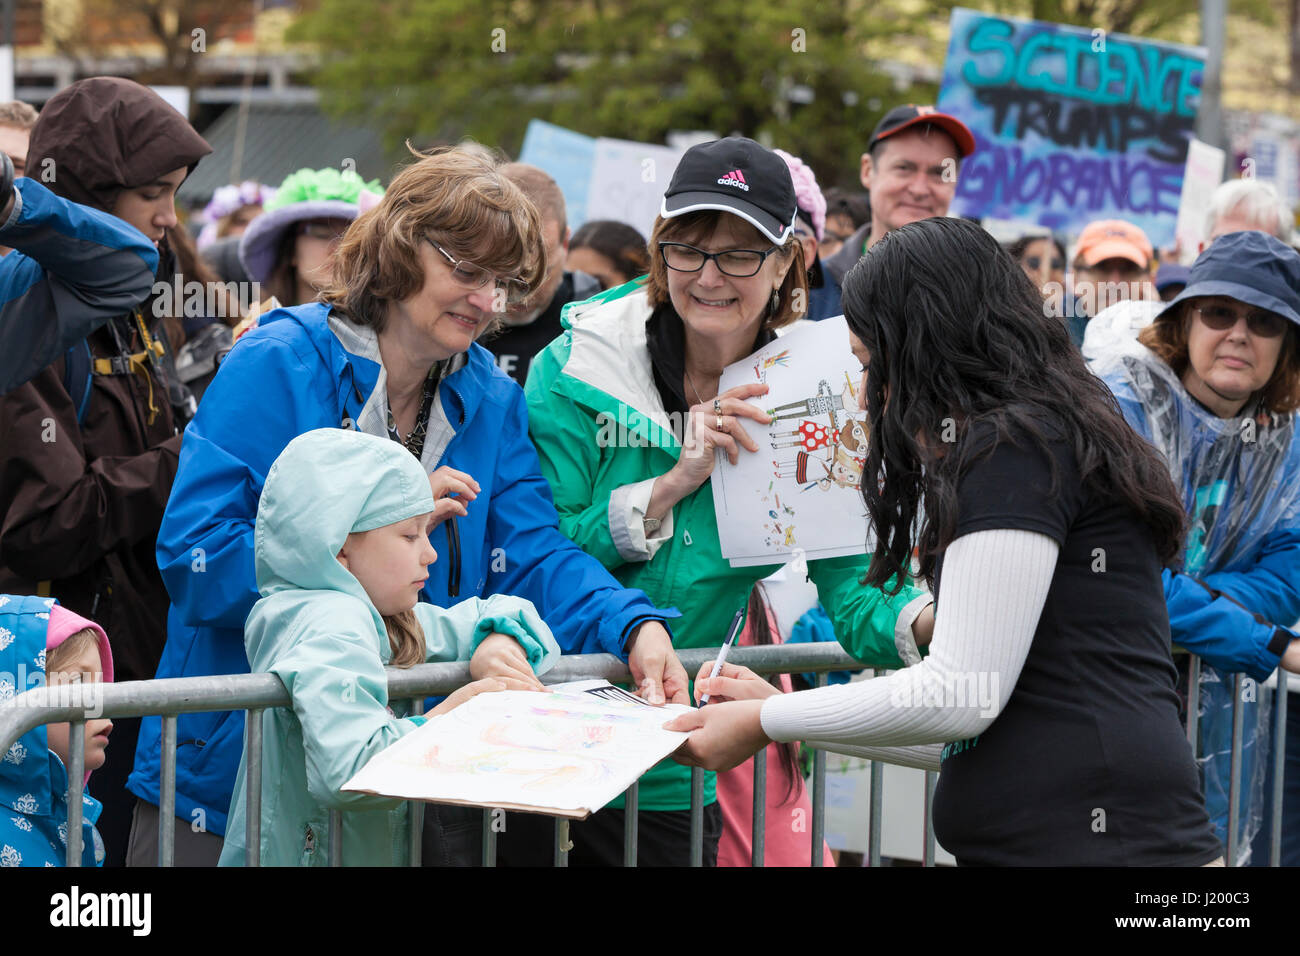 Seattle, Washington,USA. 22nd April, 2017. Speaker Tracie Delgado signs a poster for a young supporter at the rally in Cal Anderson Park. The March for Science Seattle was a non-partisan rally and sister march to the National March for Science and over 600 cities across the world on Earth Day. Thousands marched from Cal Anderson Park in the Capitol Hill neighborhood to Seattle Center to celebrate science and the role it plays in everyday lives as well as to protest the policies of the Trump administration. Stock Photo